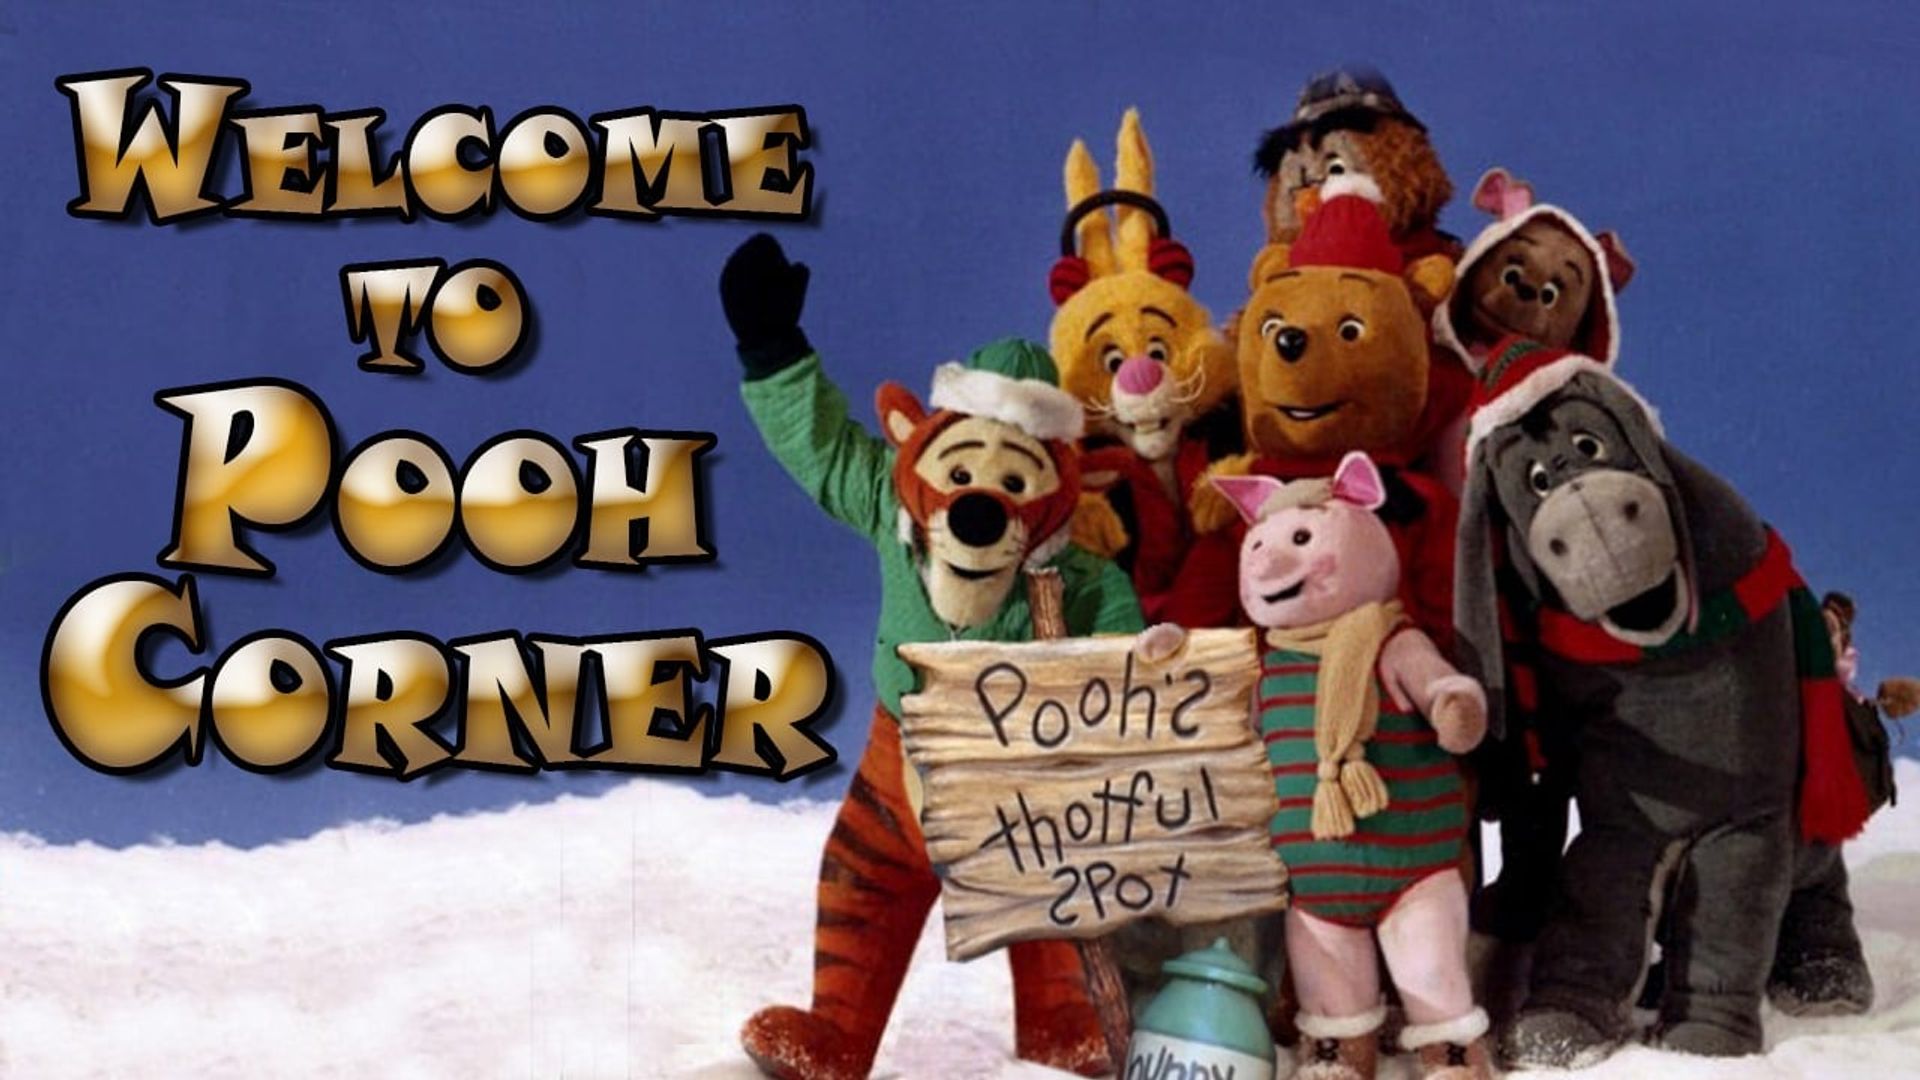 Welcome to Pooh Corner background